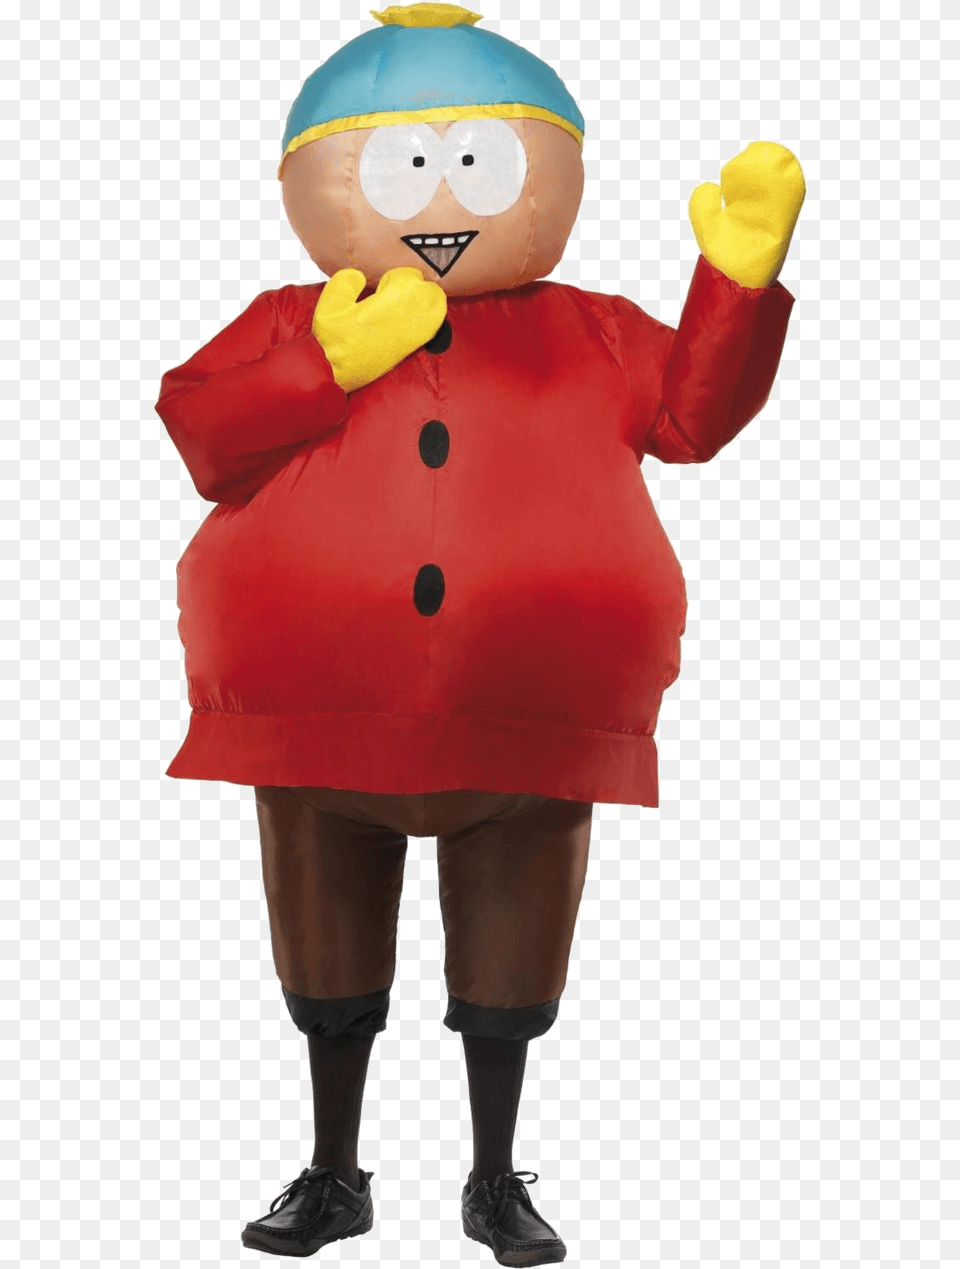 Adult Inflatable South Park Cartman Costume South Park Inflatable Costume, Clothing, Coat, Baby, Person Png